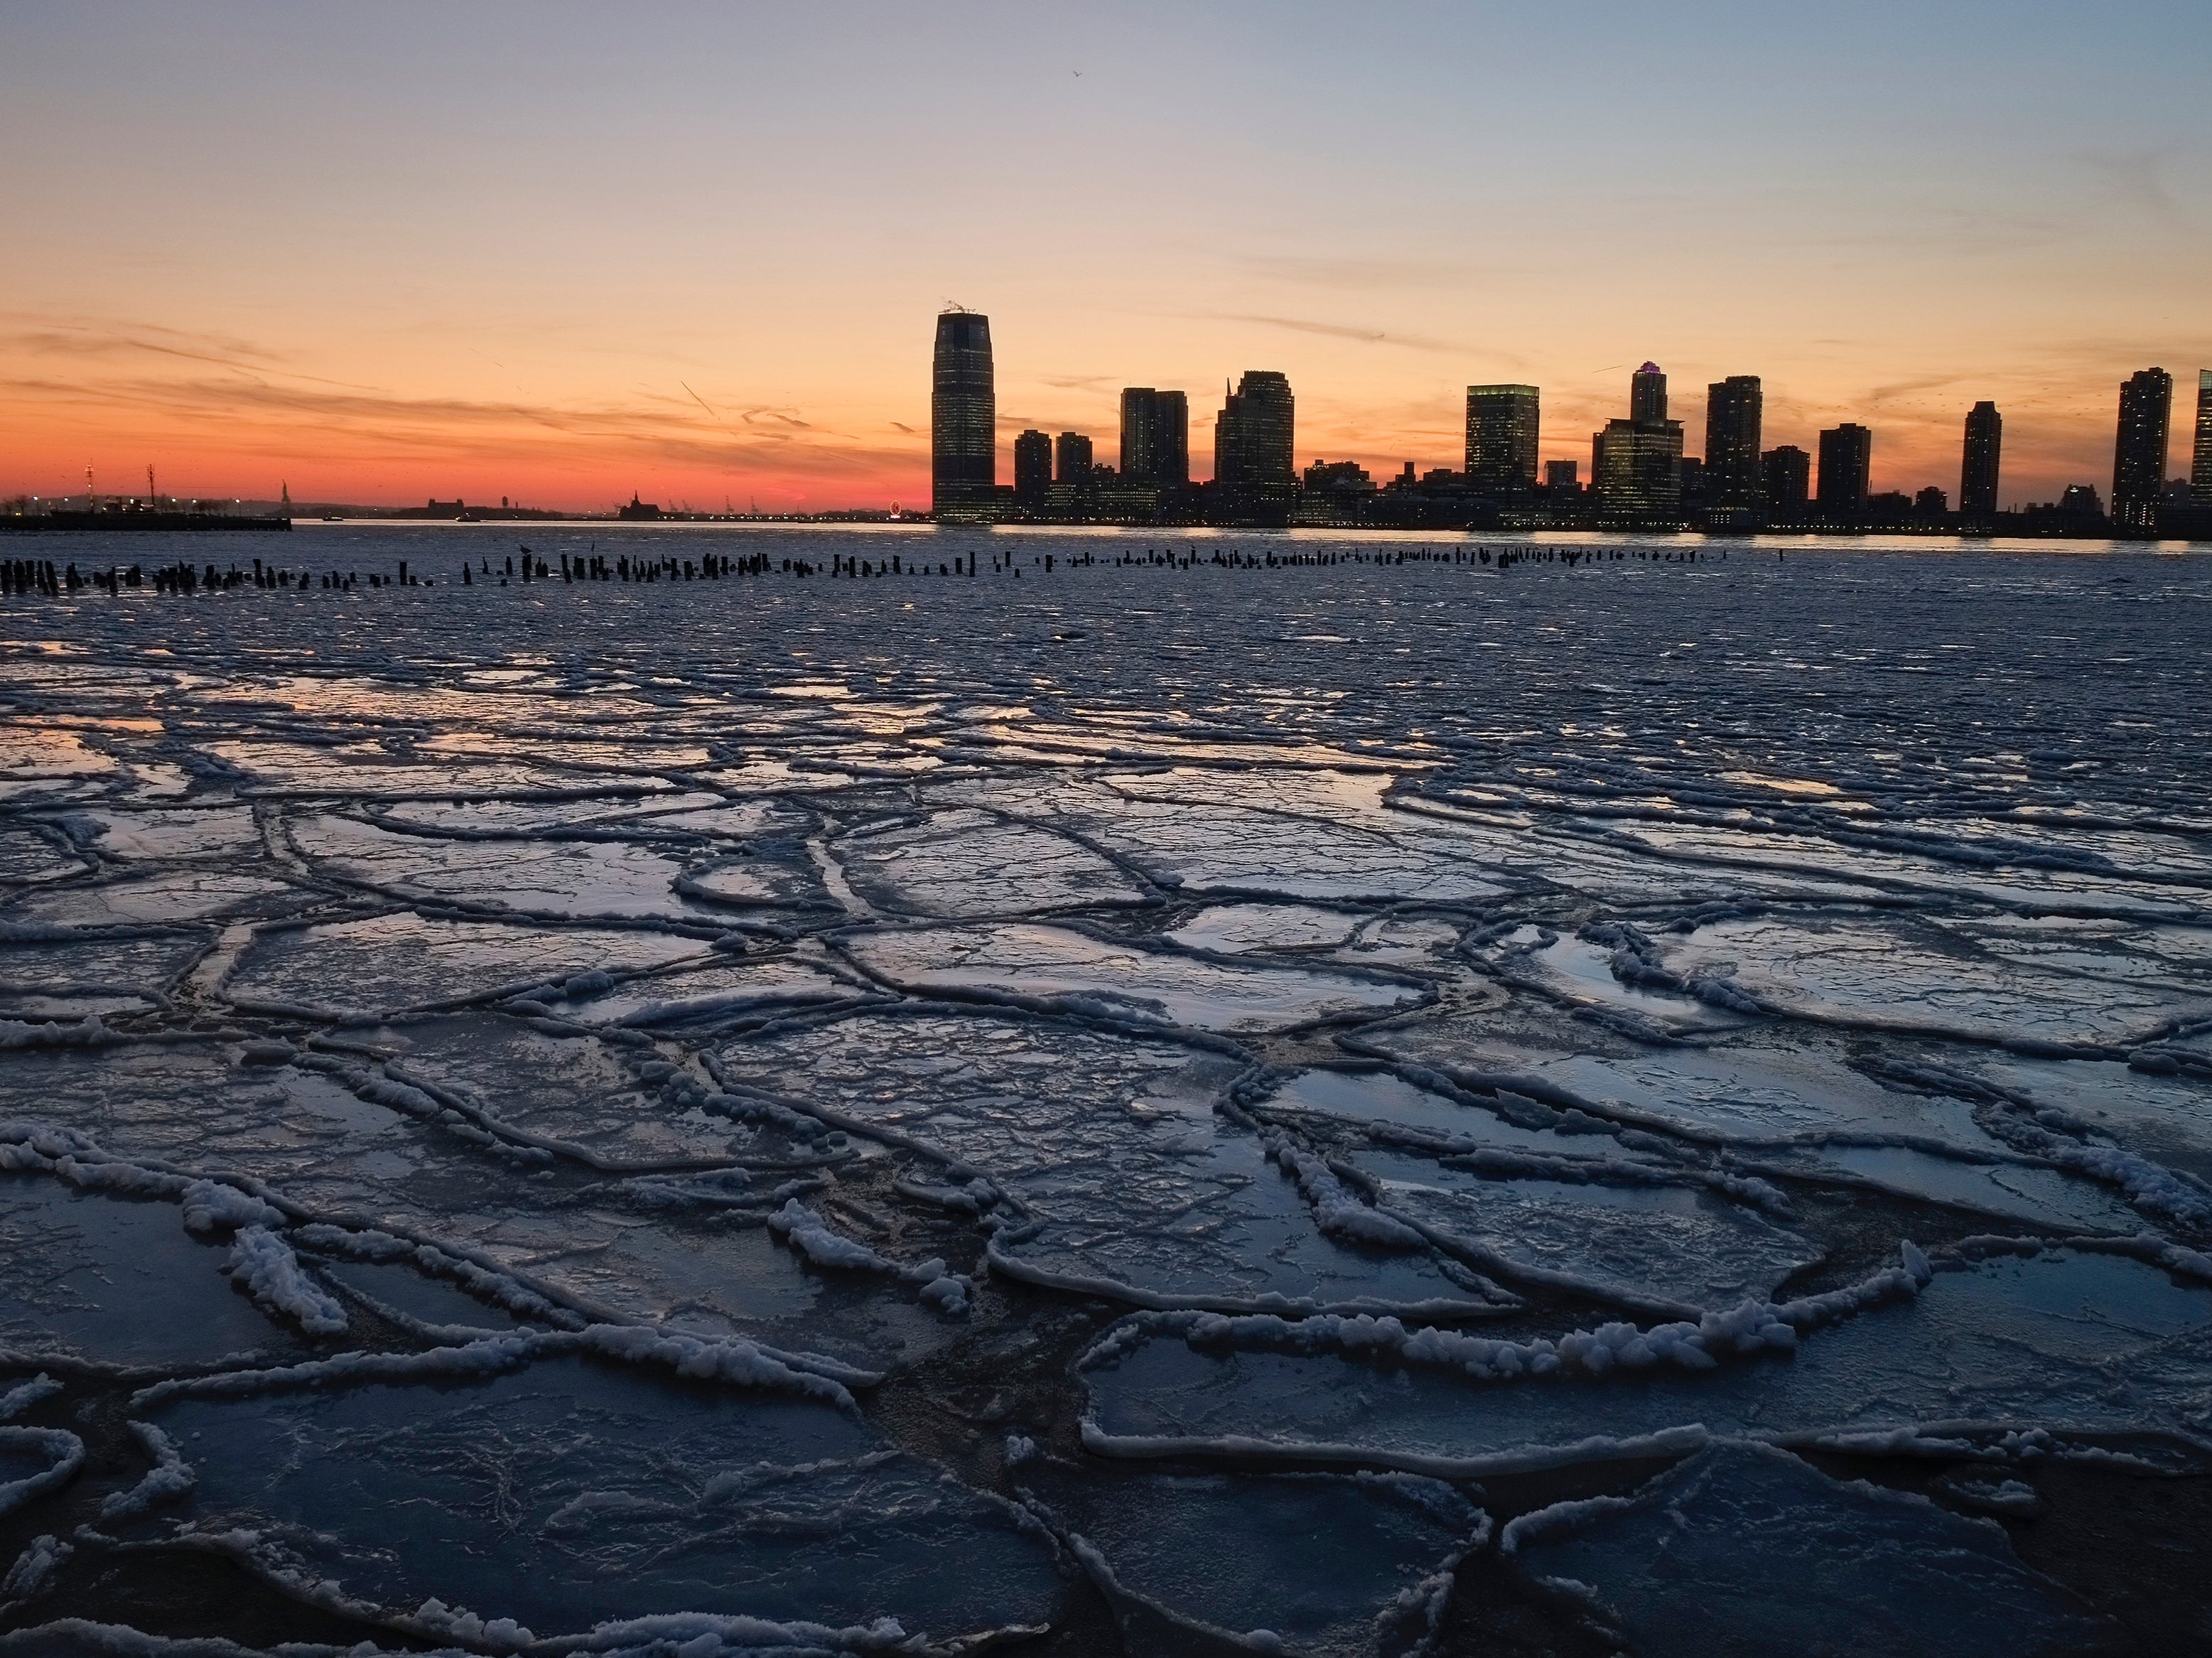 Ice floes fill the Hudson River in 2014 during a cold snap caused by the stratospheric polar vortex